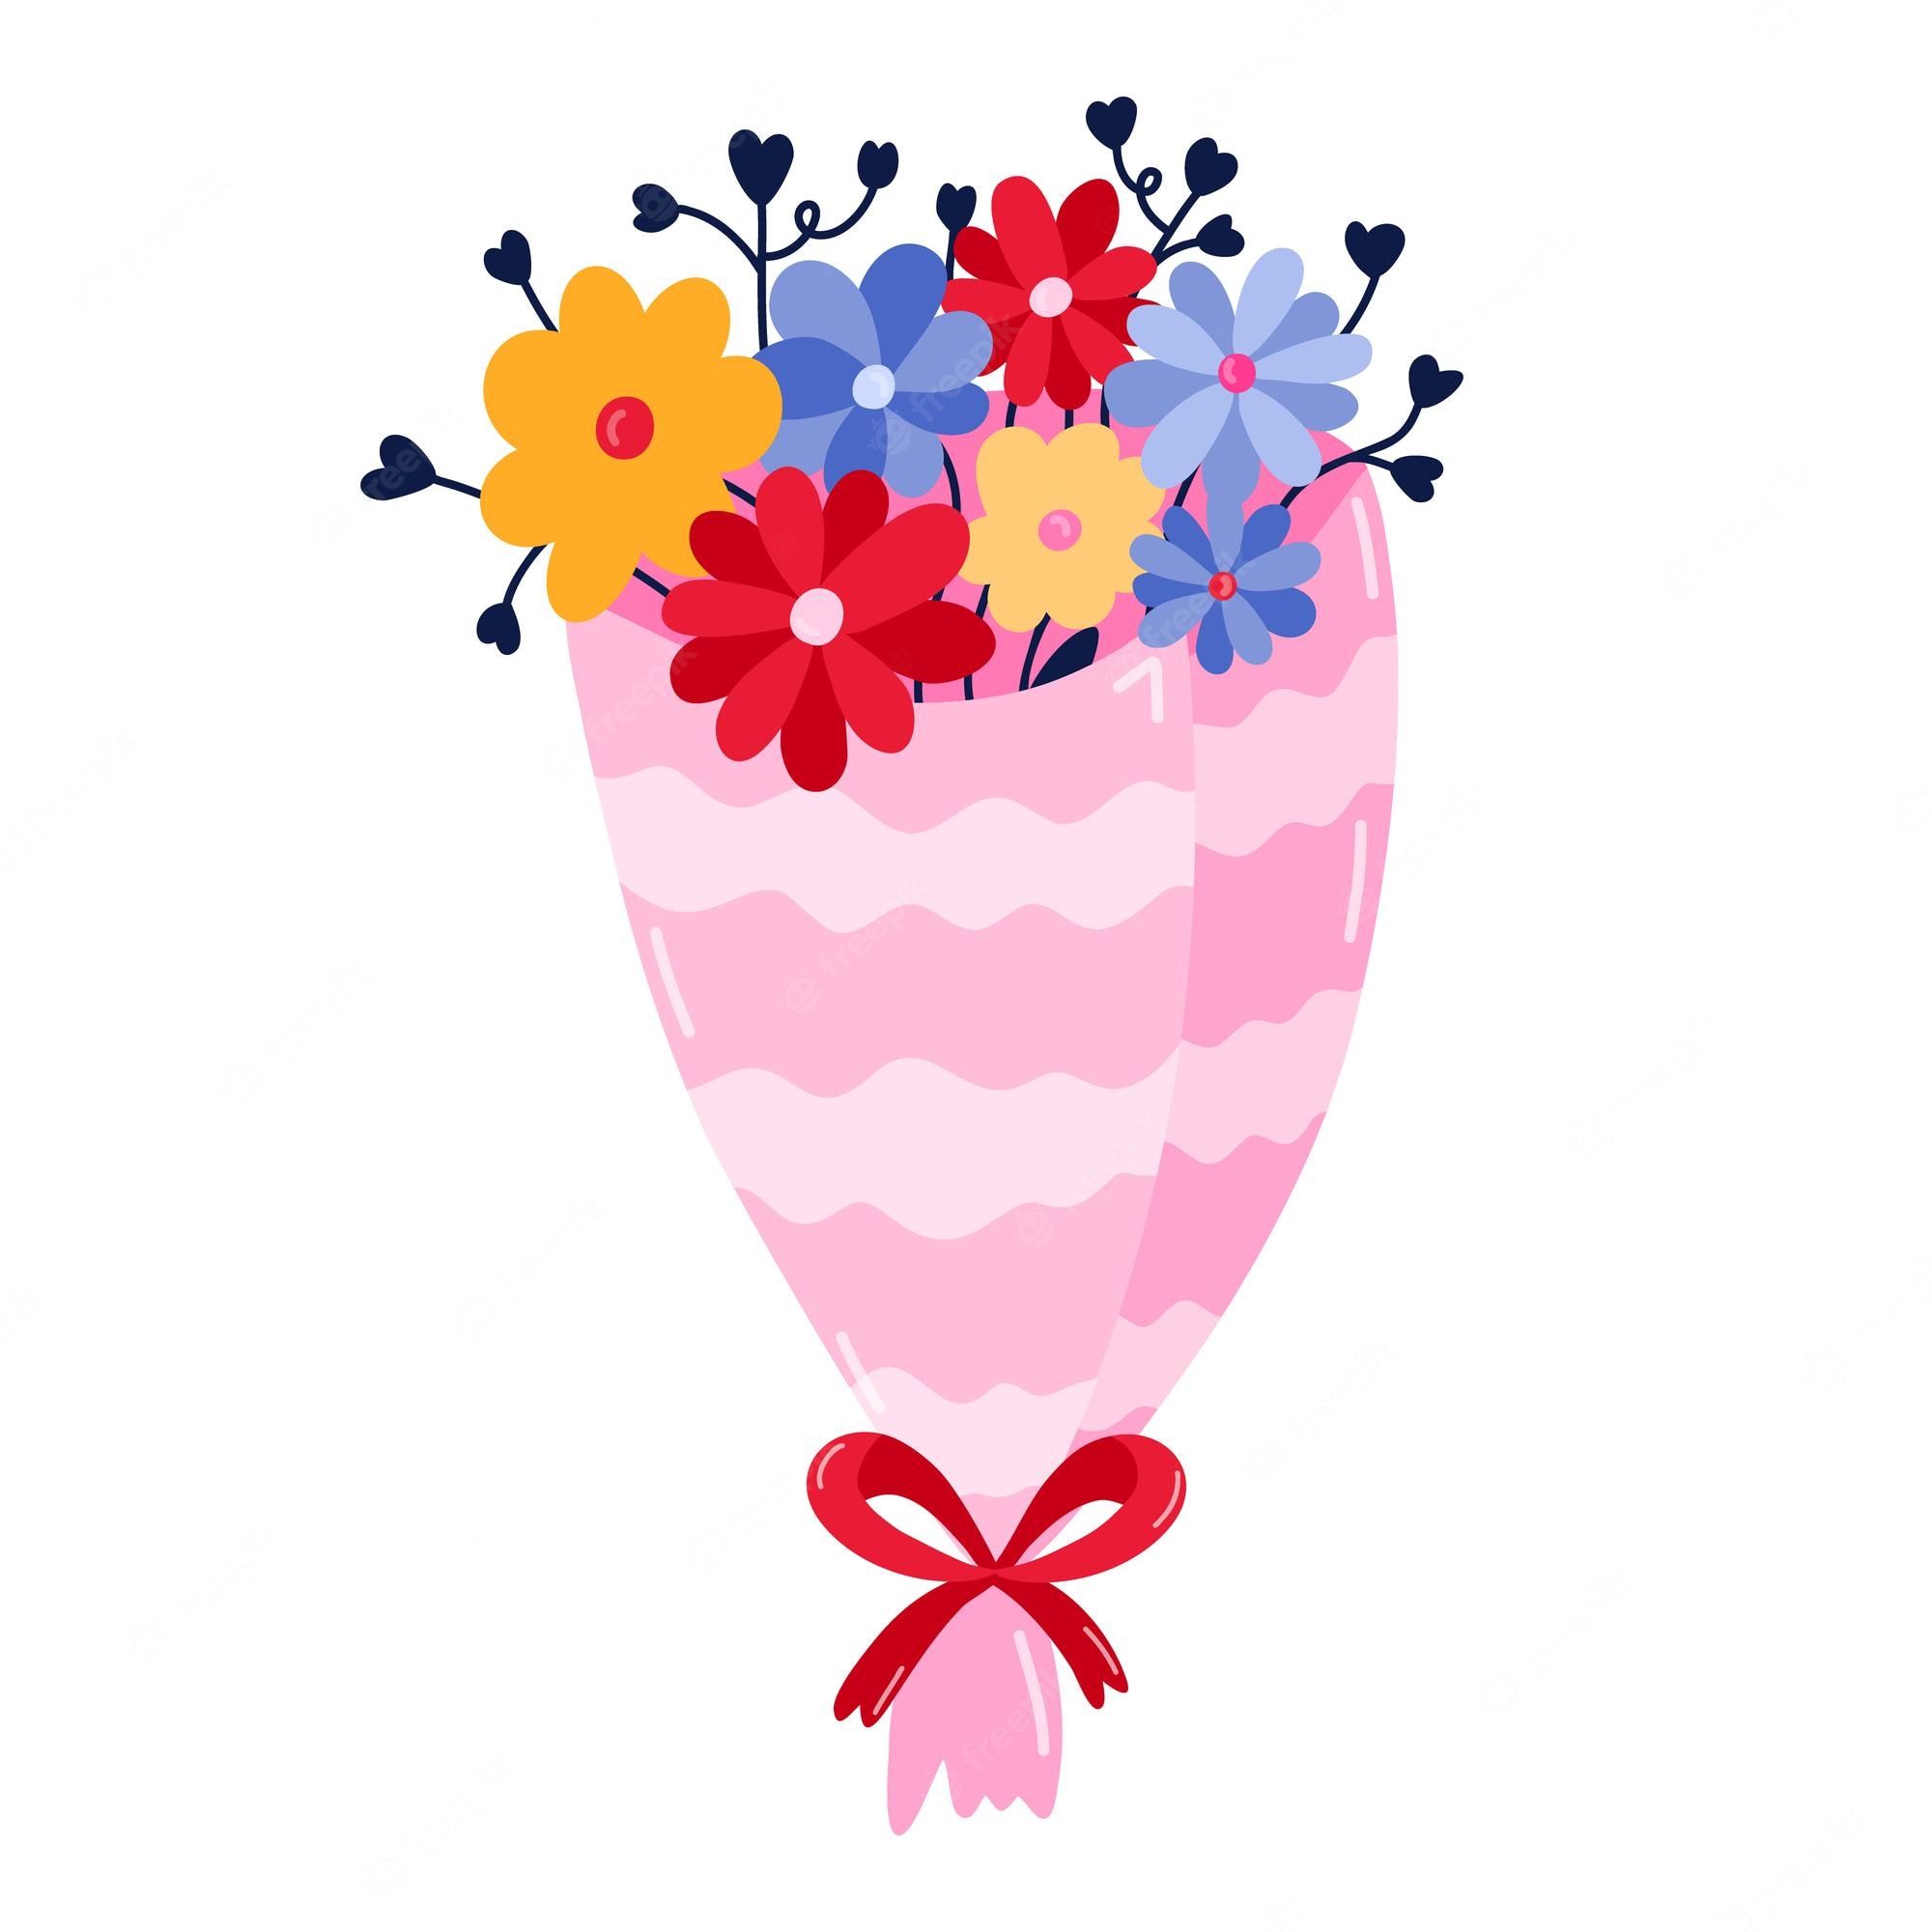 Cute Bouquet Flowers Balloons Valentine Day Vector Illustration - Clip ...